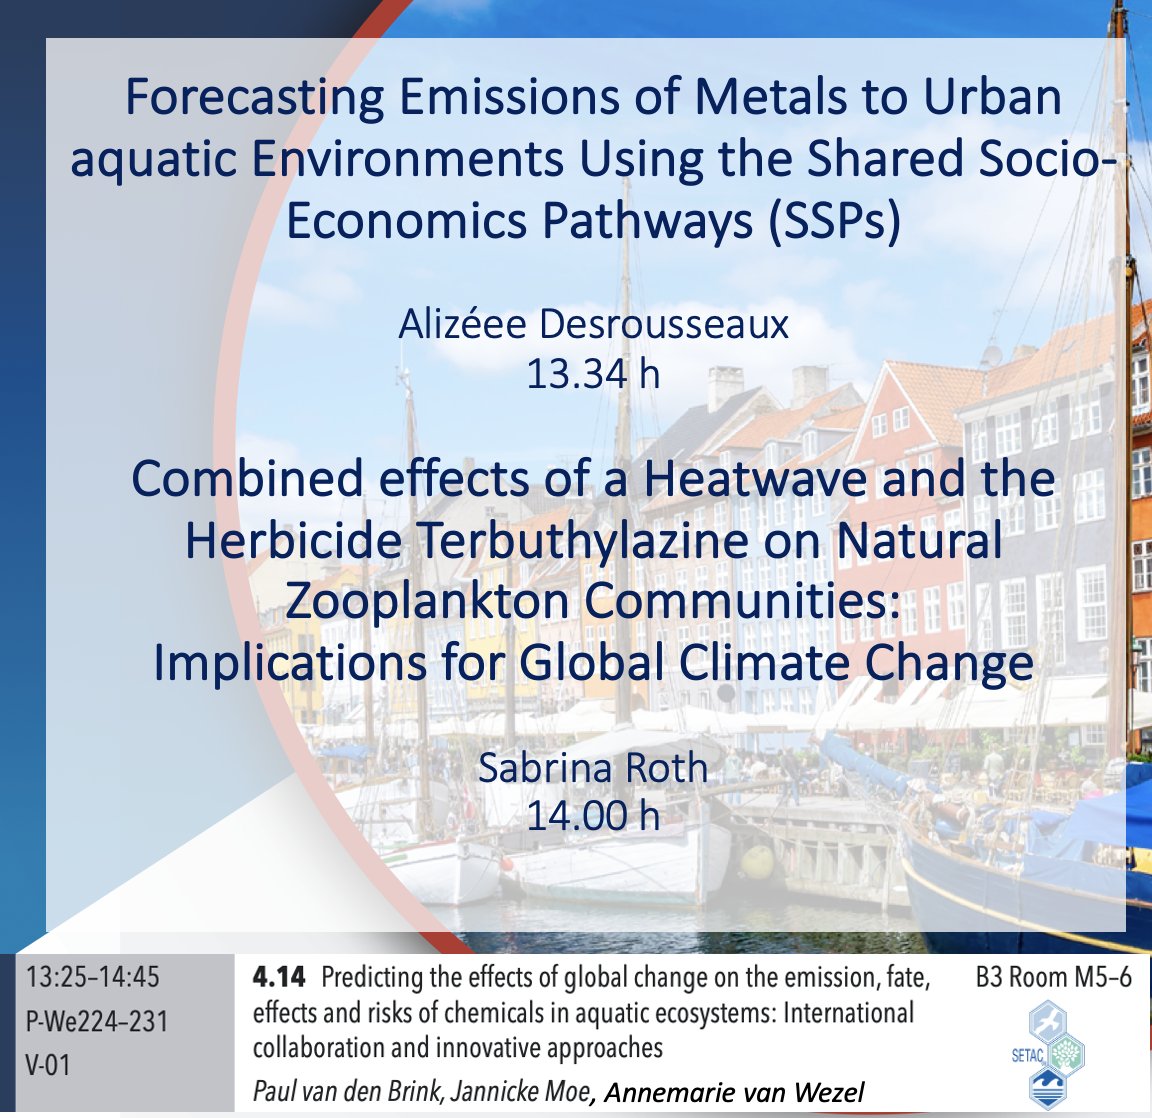 Ever wondered about combined effects of #globalclimatechange and #chemicals? ☀️🌡🧪💦 Join our session today at #SETACCopenhagen and see @AlizeeDSRX and me presenting interesting findings! #metals #SSPs #heatwave #pesticide @EcoITN @YorkEnvironment @AcesSthlmUni @SETAC_world